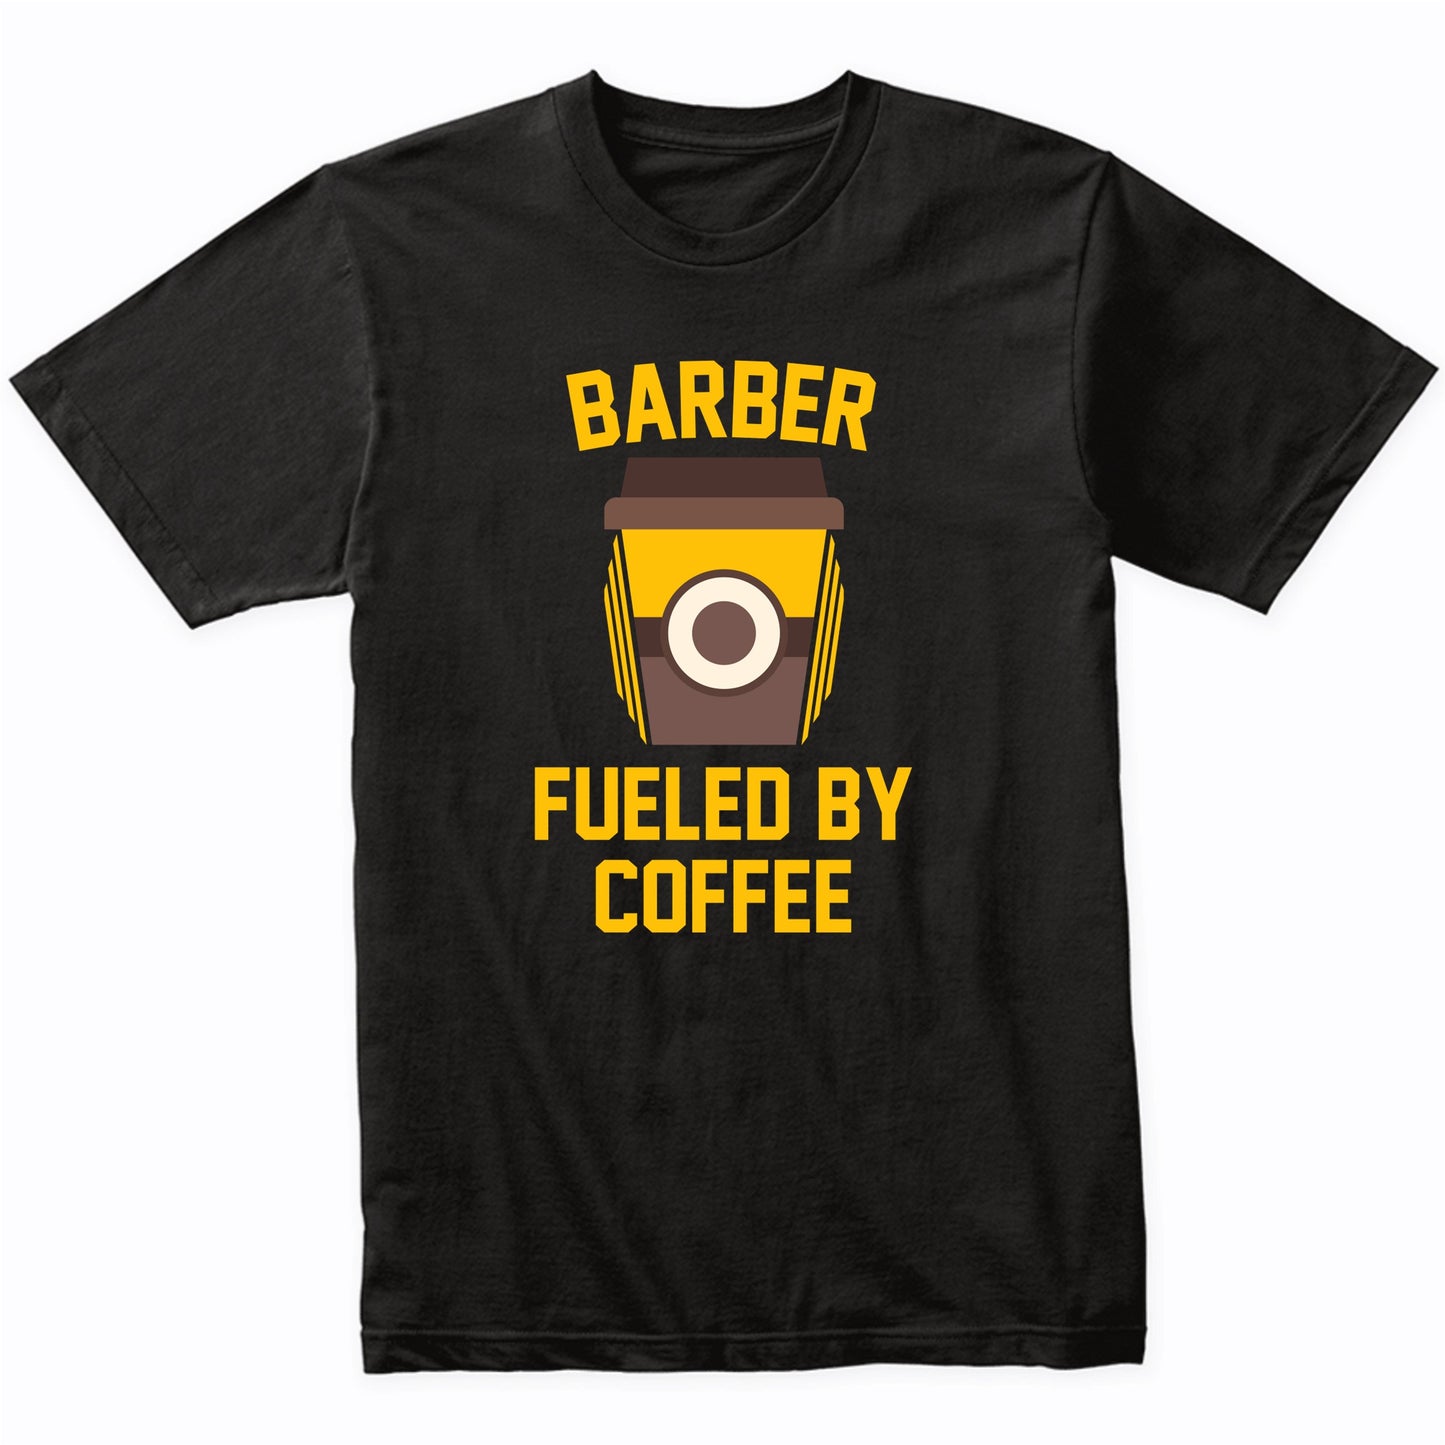 Barber Fueled By Coffee Funny Shirt